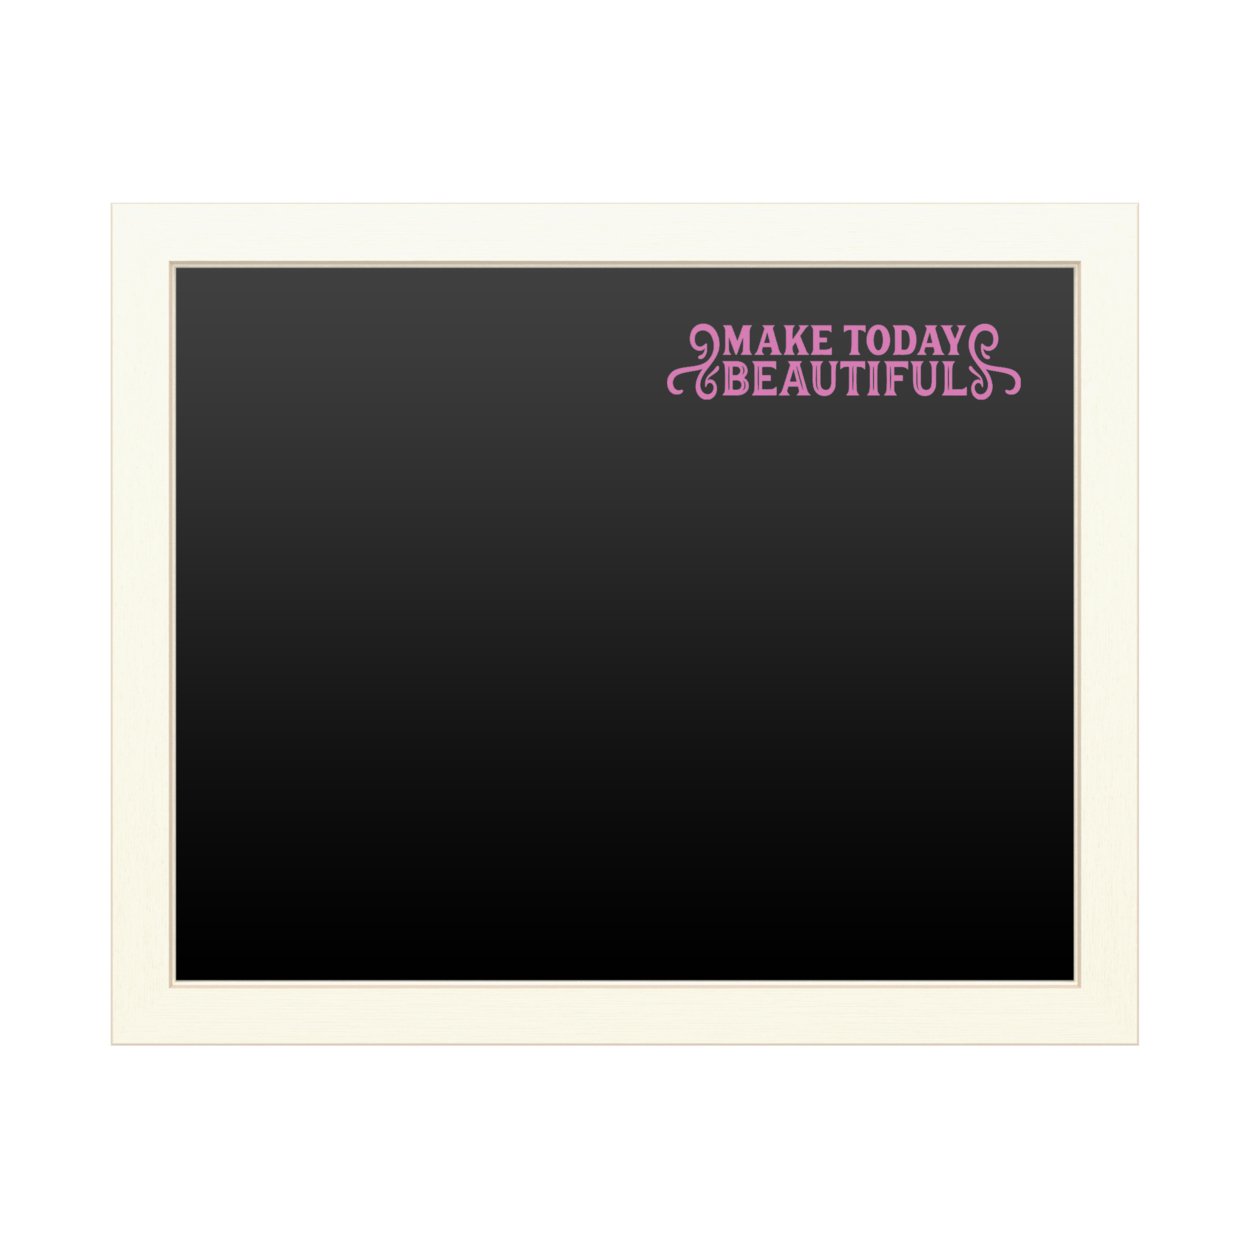 16 X 20 Chalk Board With Printed Artwork - Make Today Beautiful 2 White Board - Ready To Hang Chalkboard